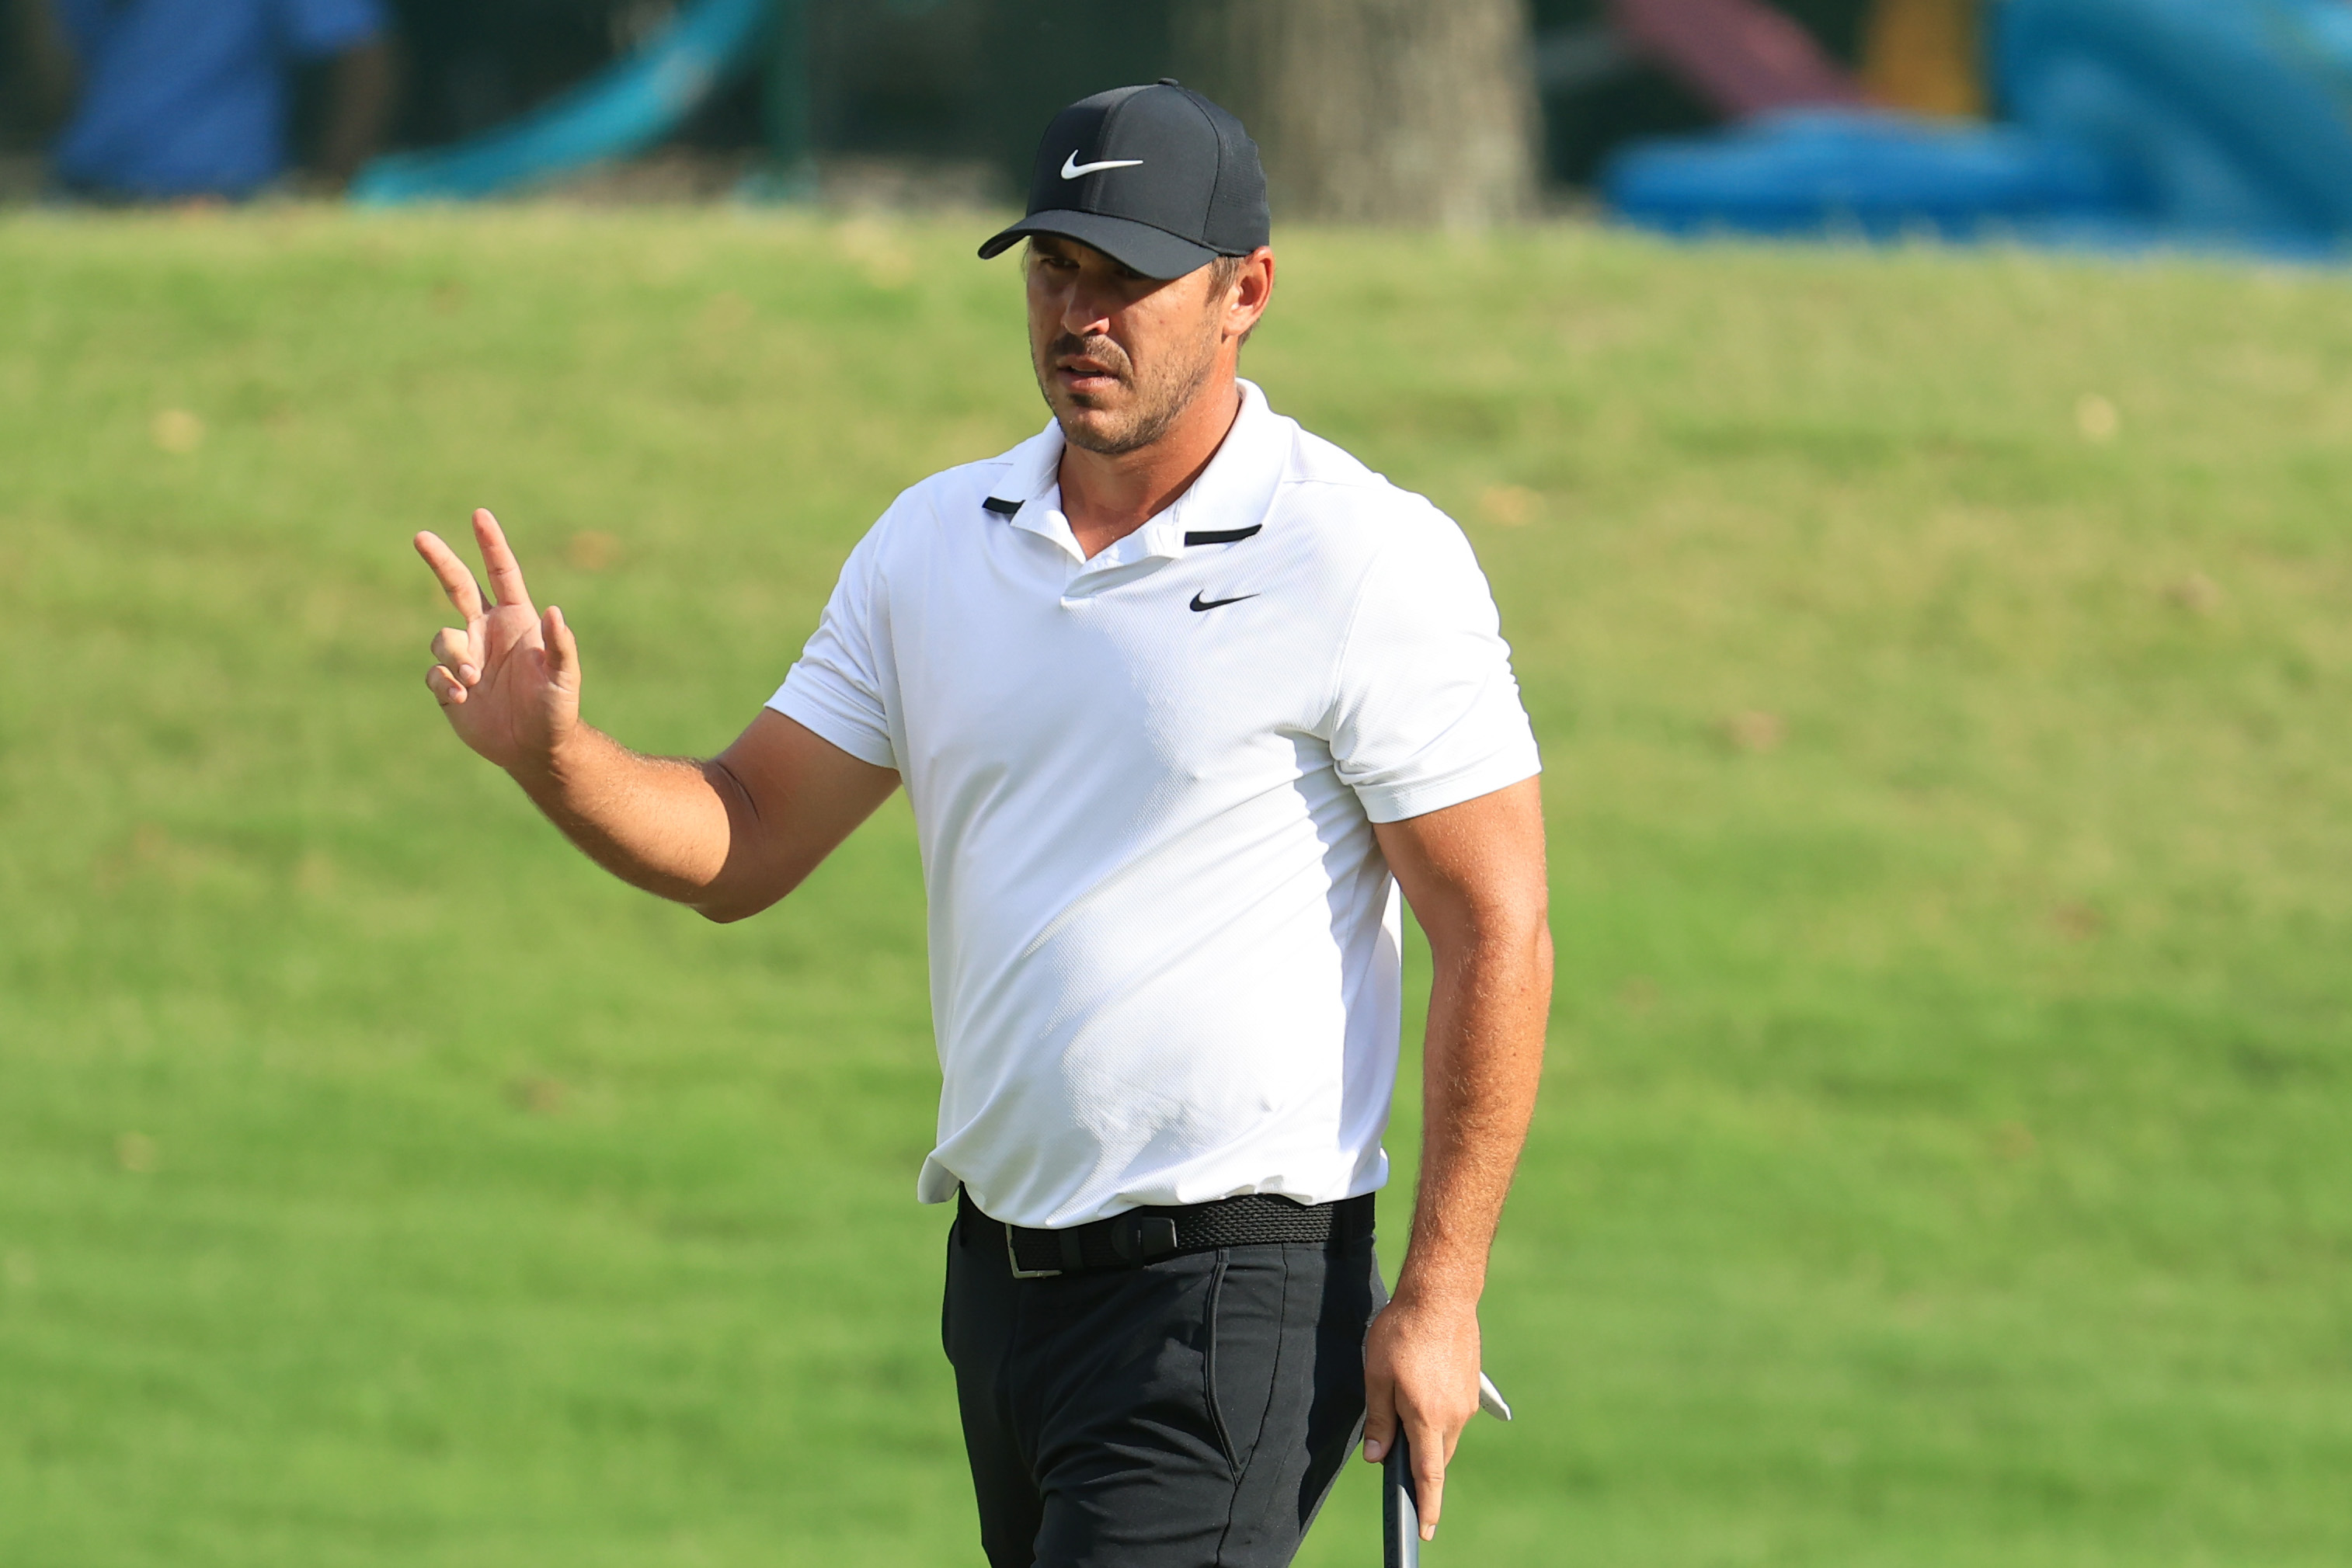 Takeaways from the PGA Championship